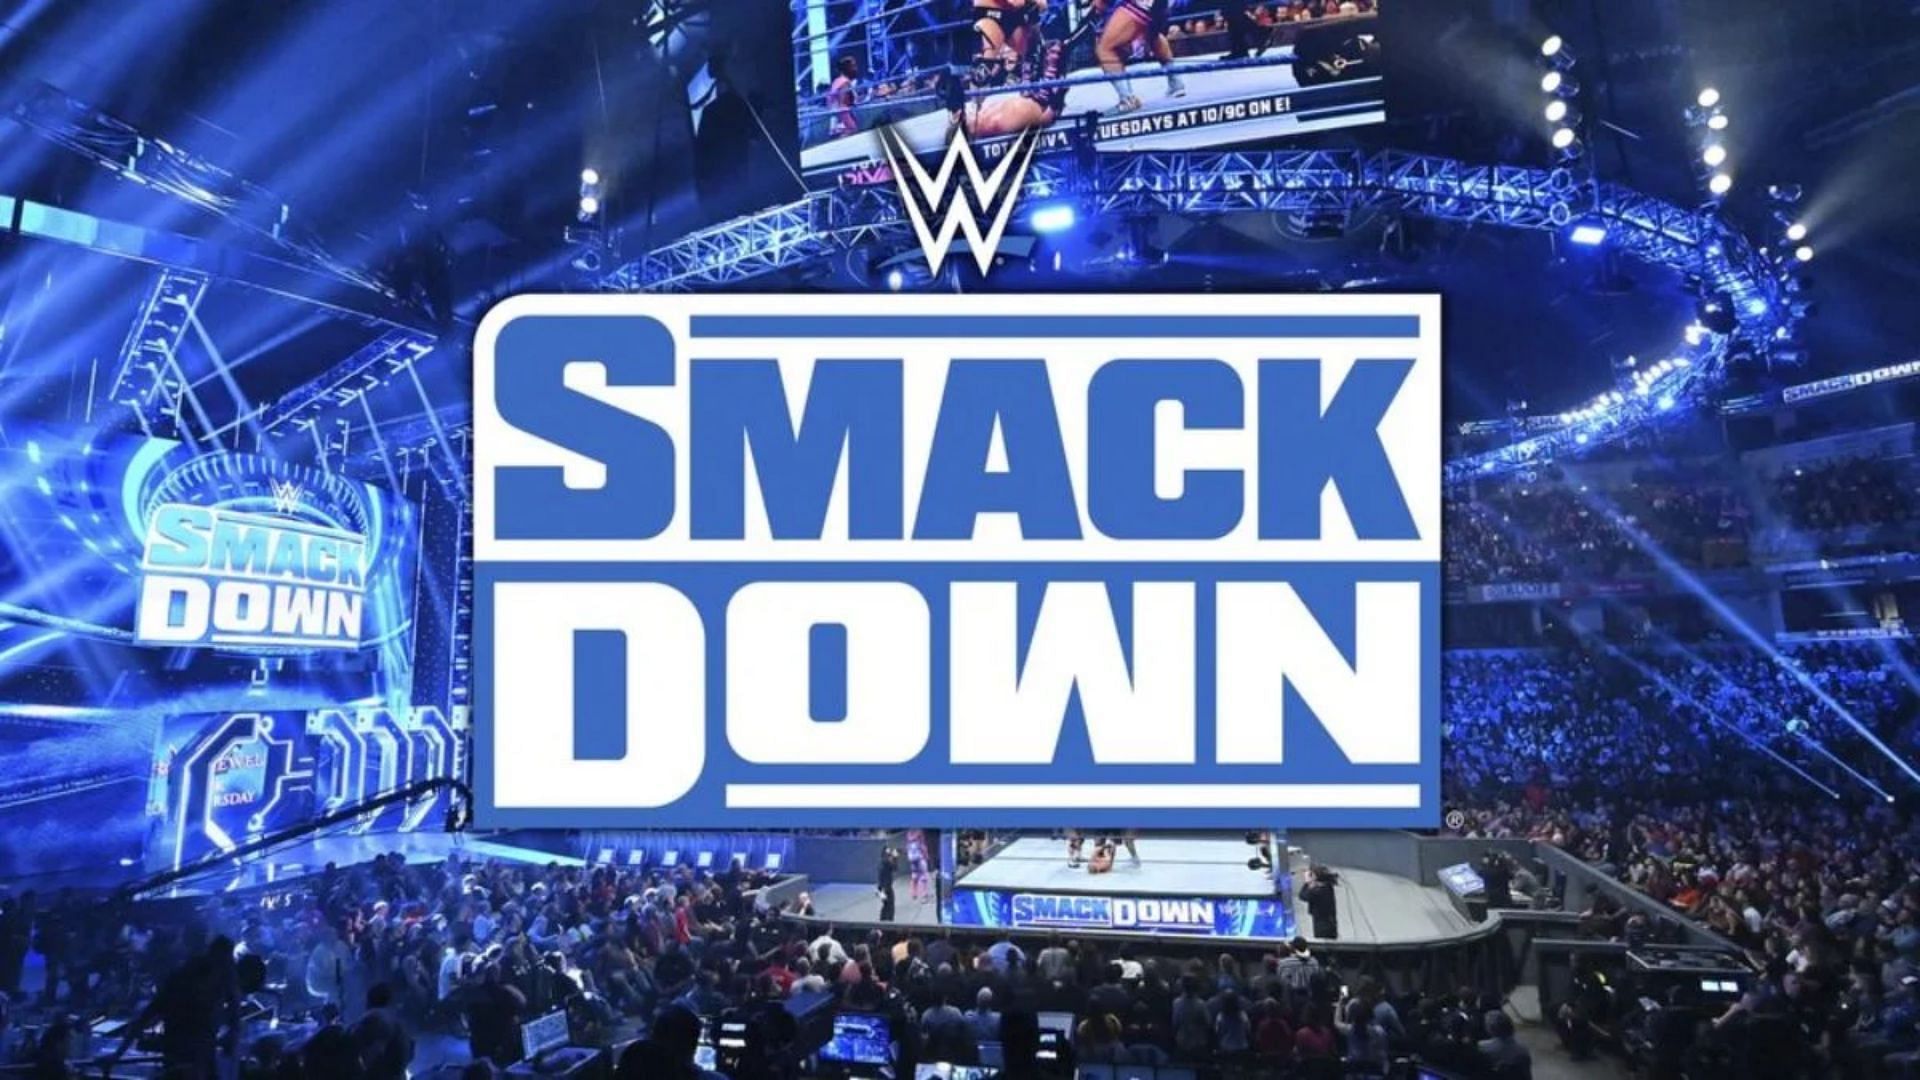 New champion will be joined by stablemate on WWE SmackDown